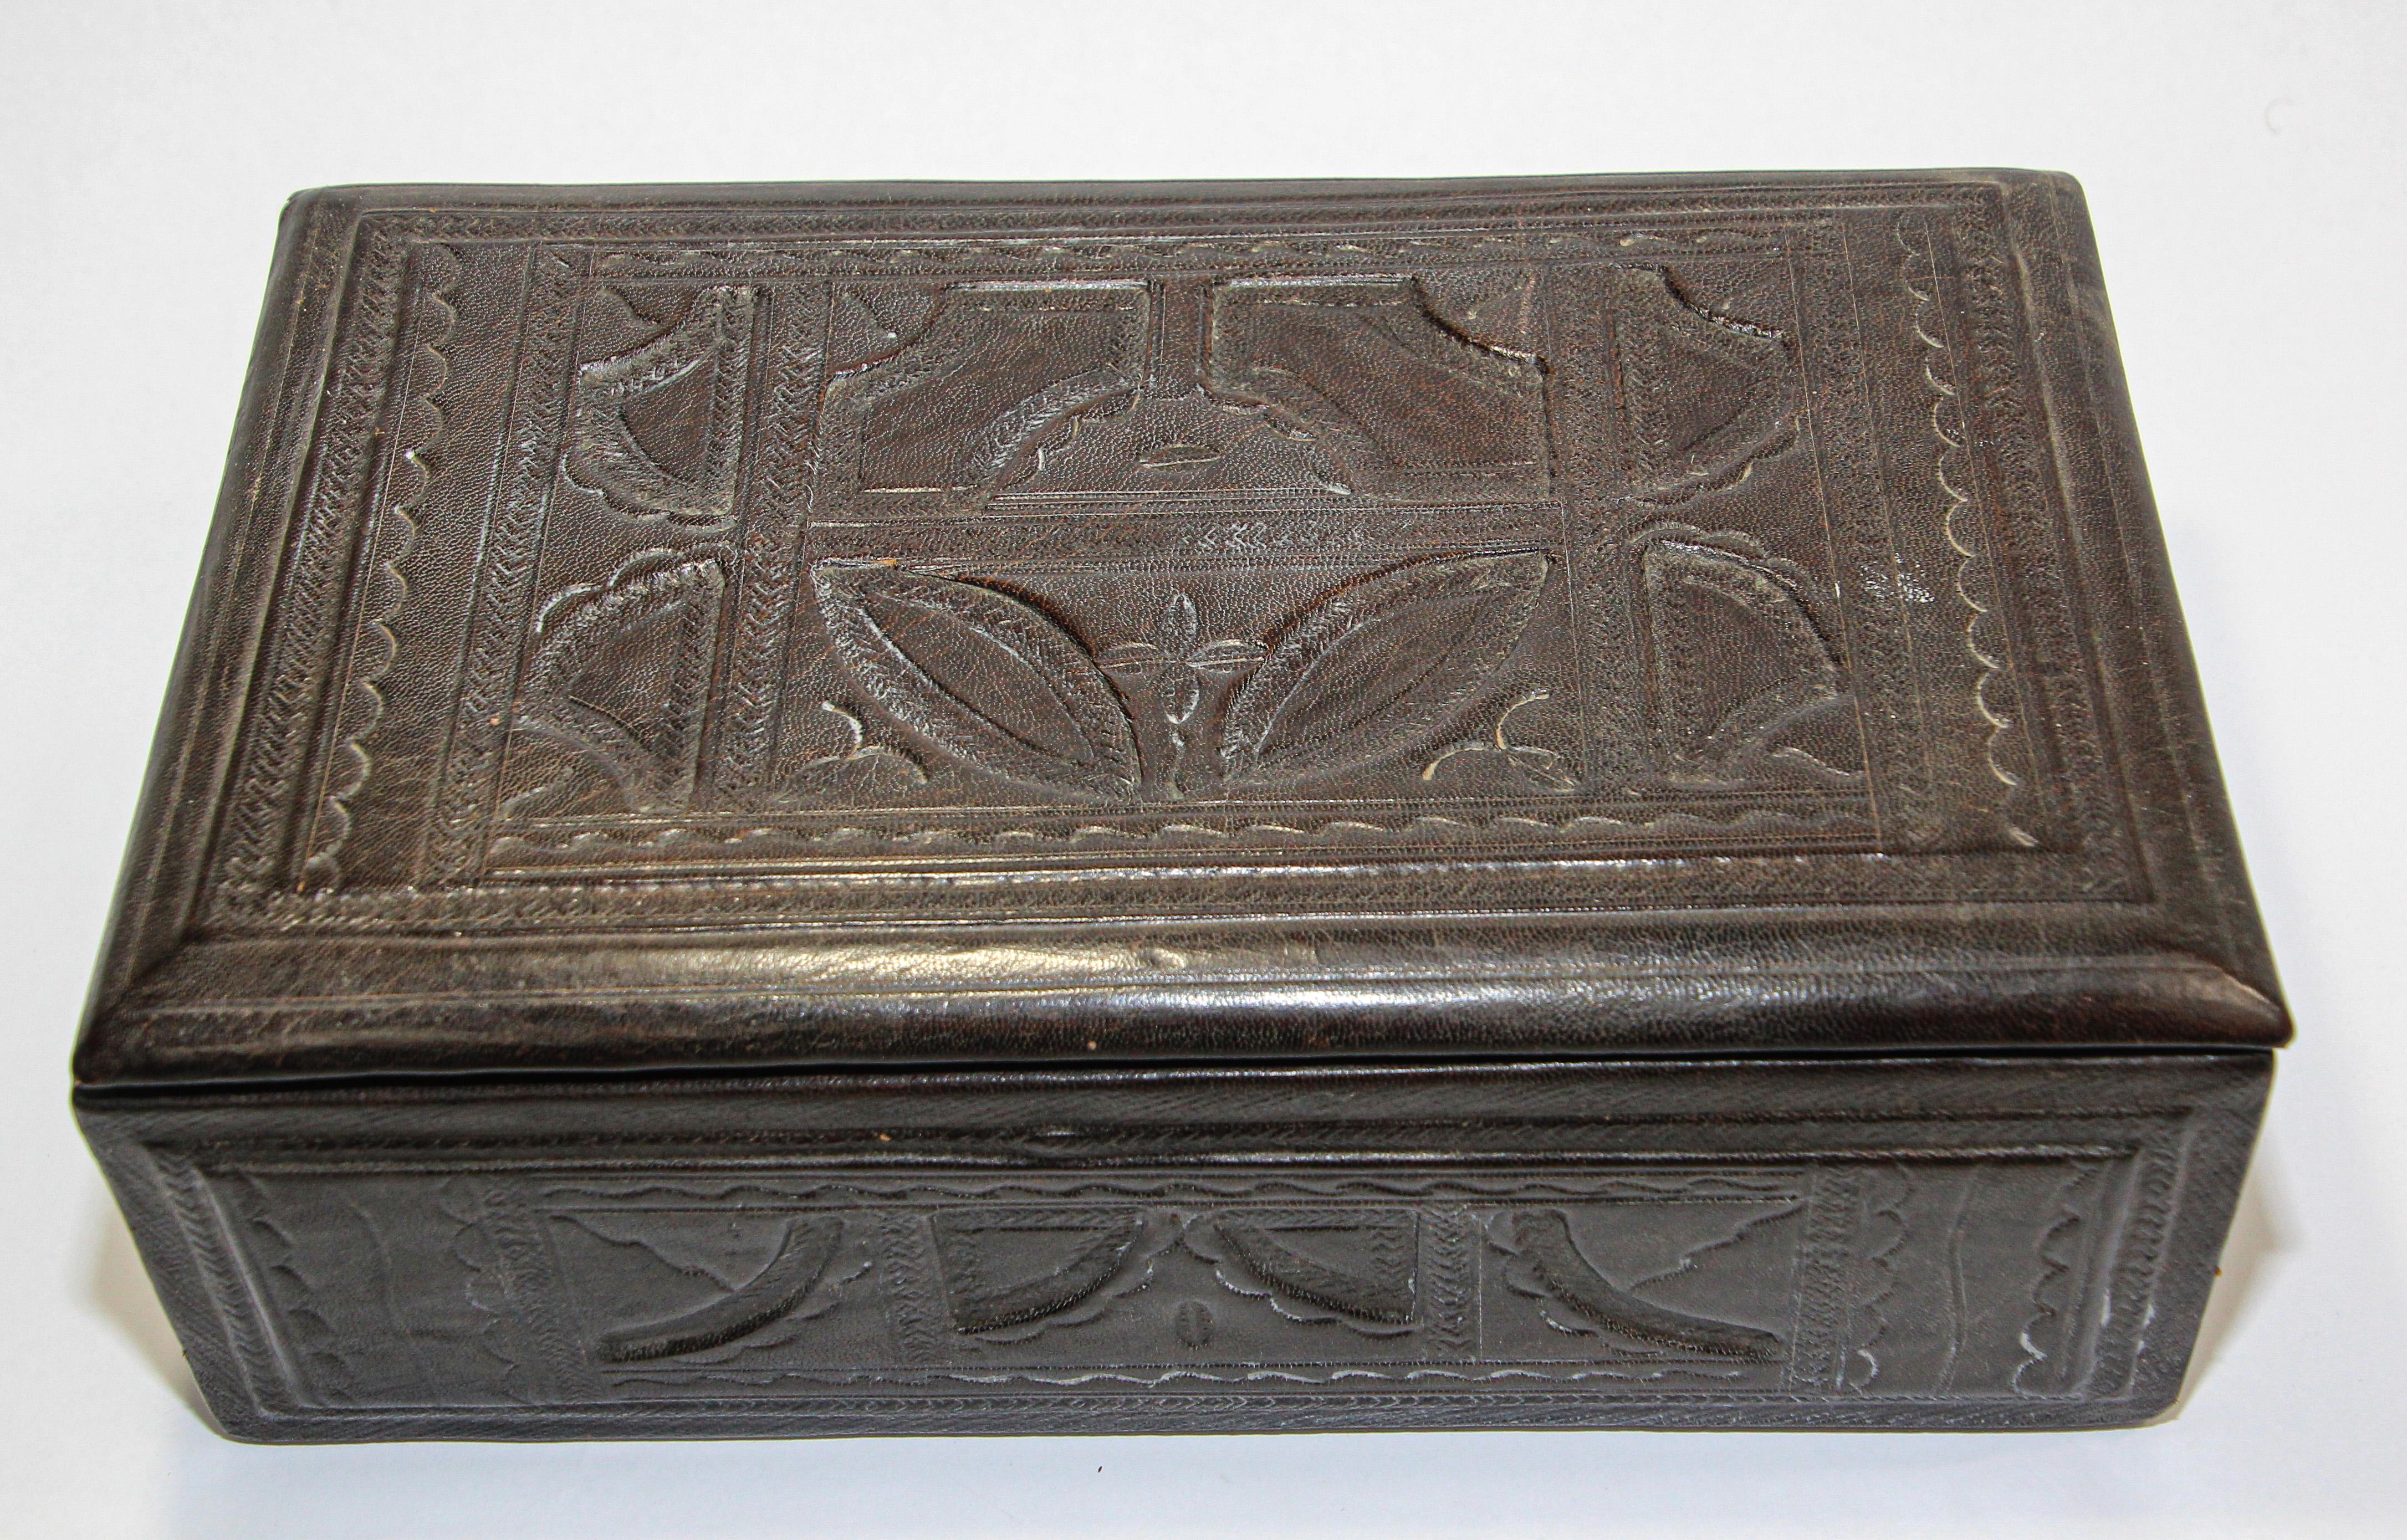 Large Hand tooled leather box from Africa.
Very fine workmanship with tribal traditional West African symbols on dark brown leather.
Tuareg style probably Mauritania.
Open to a velvet lined interior.
Dimensions: 11